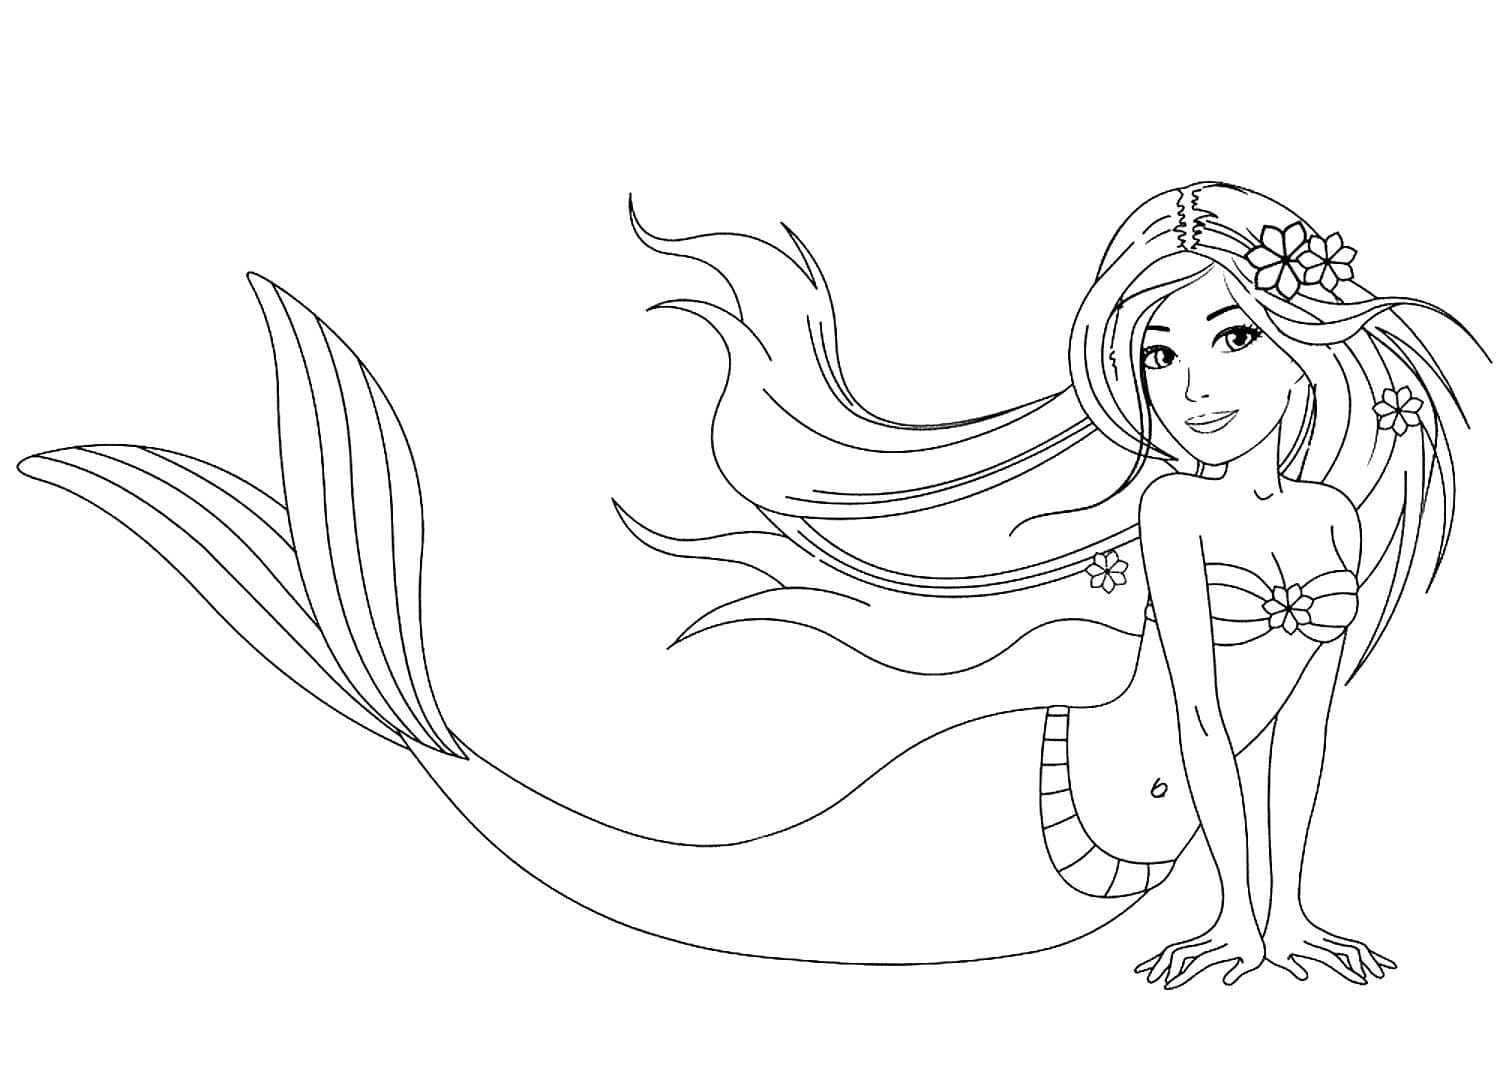 Coloring page Barbie Mermaid Barbie doll for girls